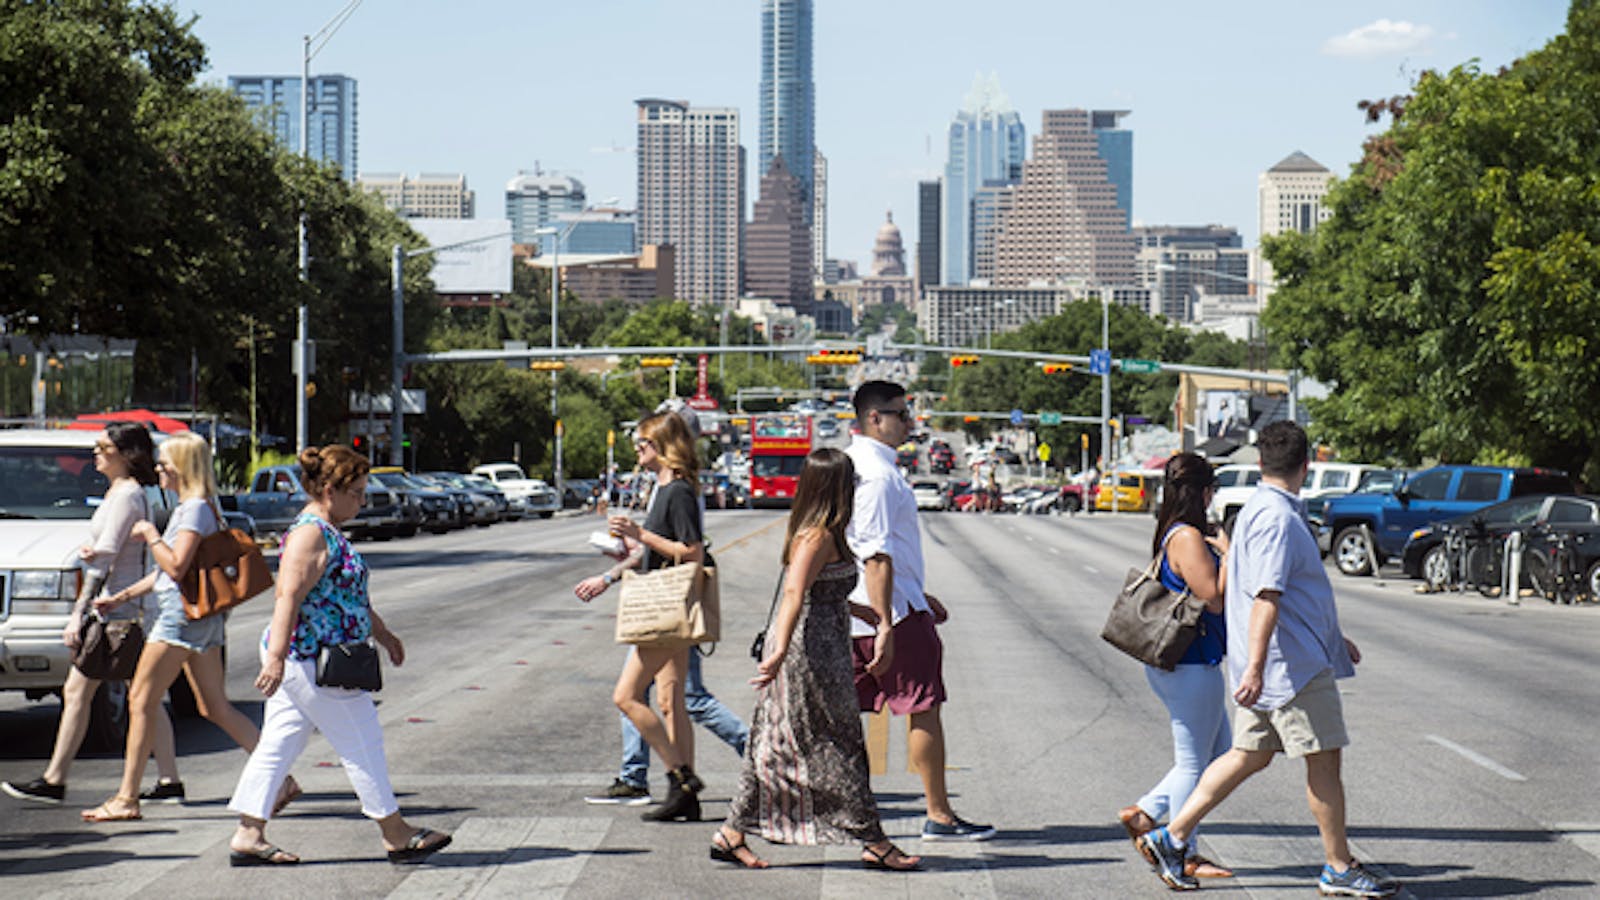 Vacation rental startups are snapping up apartment leases in places like Austin, Texas, above. Photo: Bloomberg